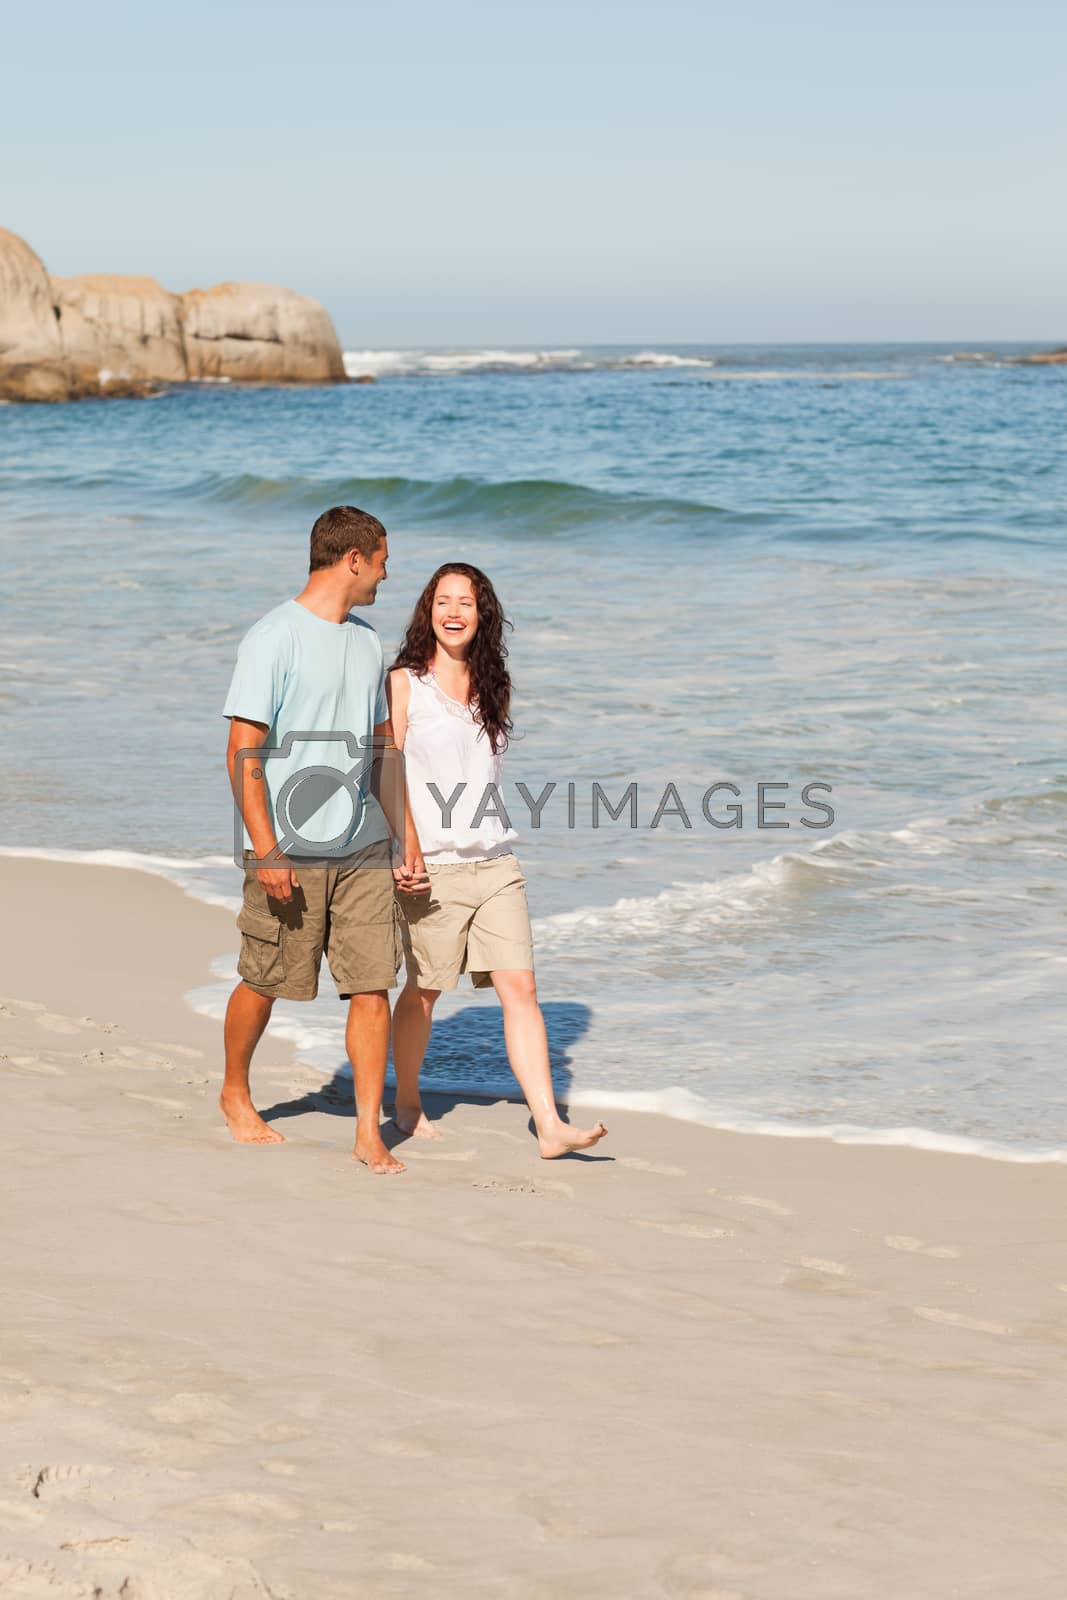 Royalty free image of Couple walking on the beach by Wavebreakmedia